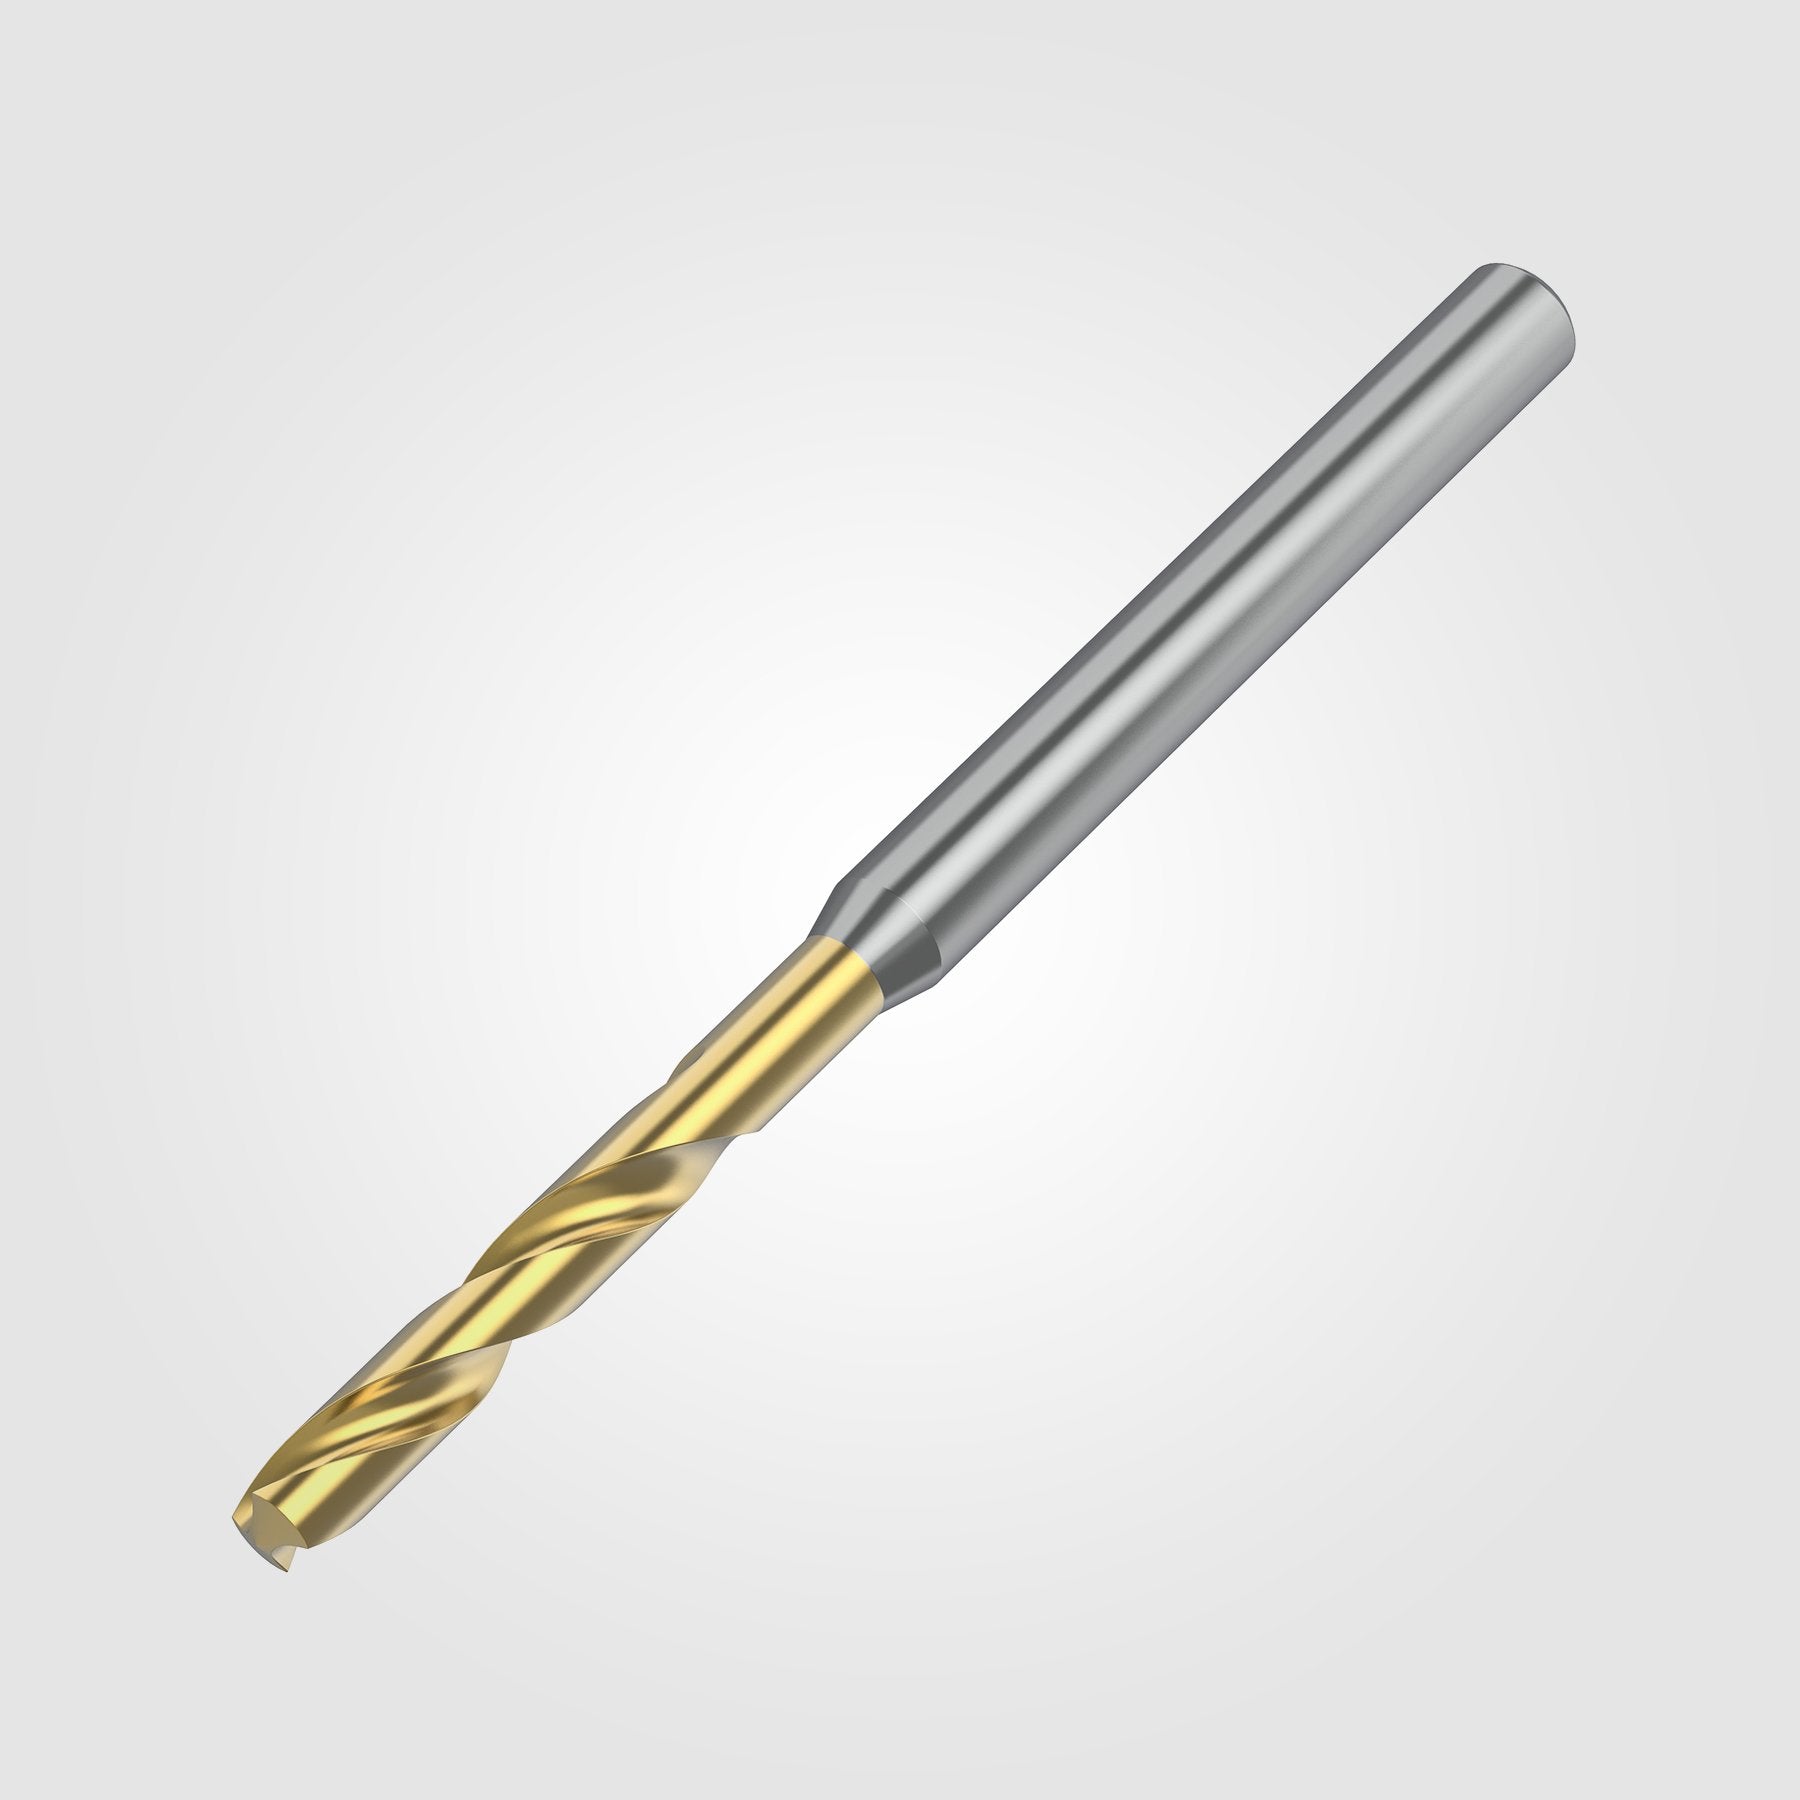 GOdrill (THROUGH COOLANT) | 5.5mm / .2165" / 3xD | SOLID CARBIDE DRILL | 4151142